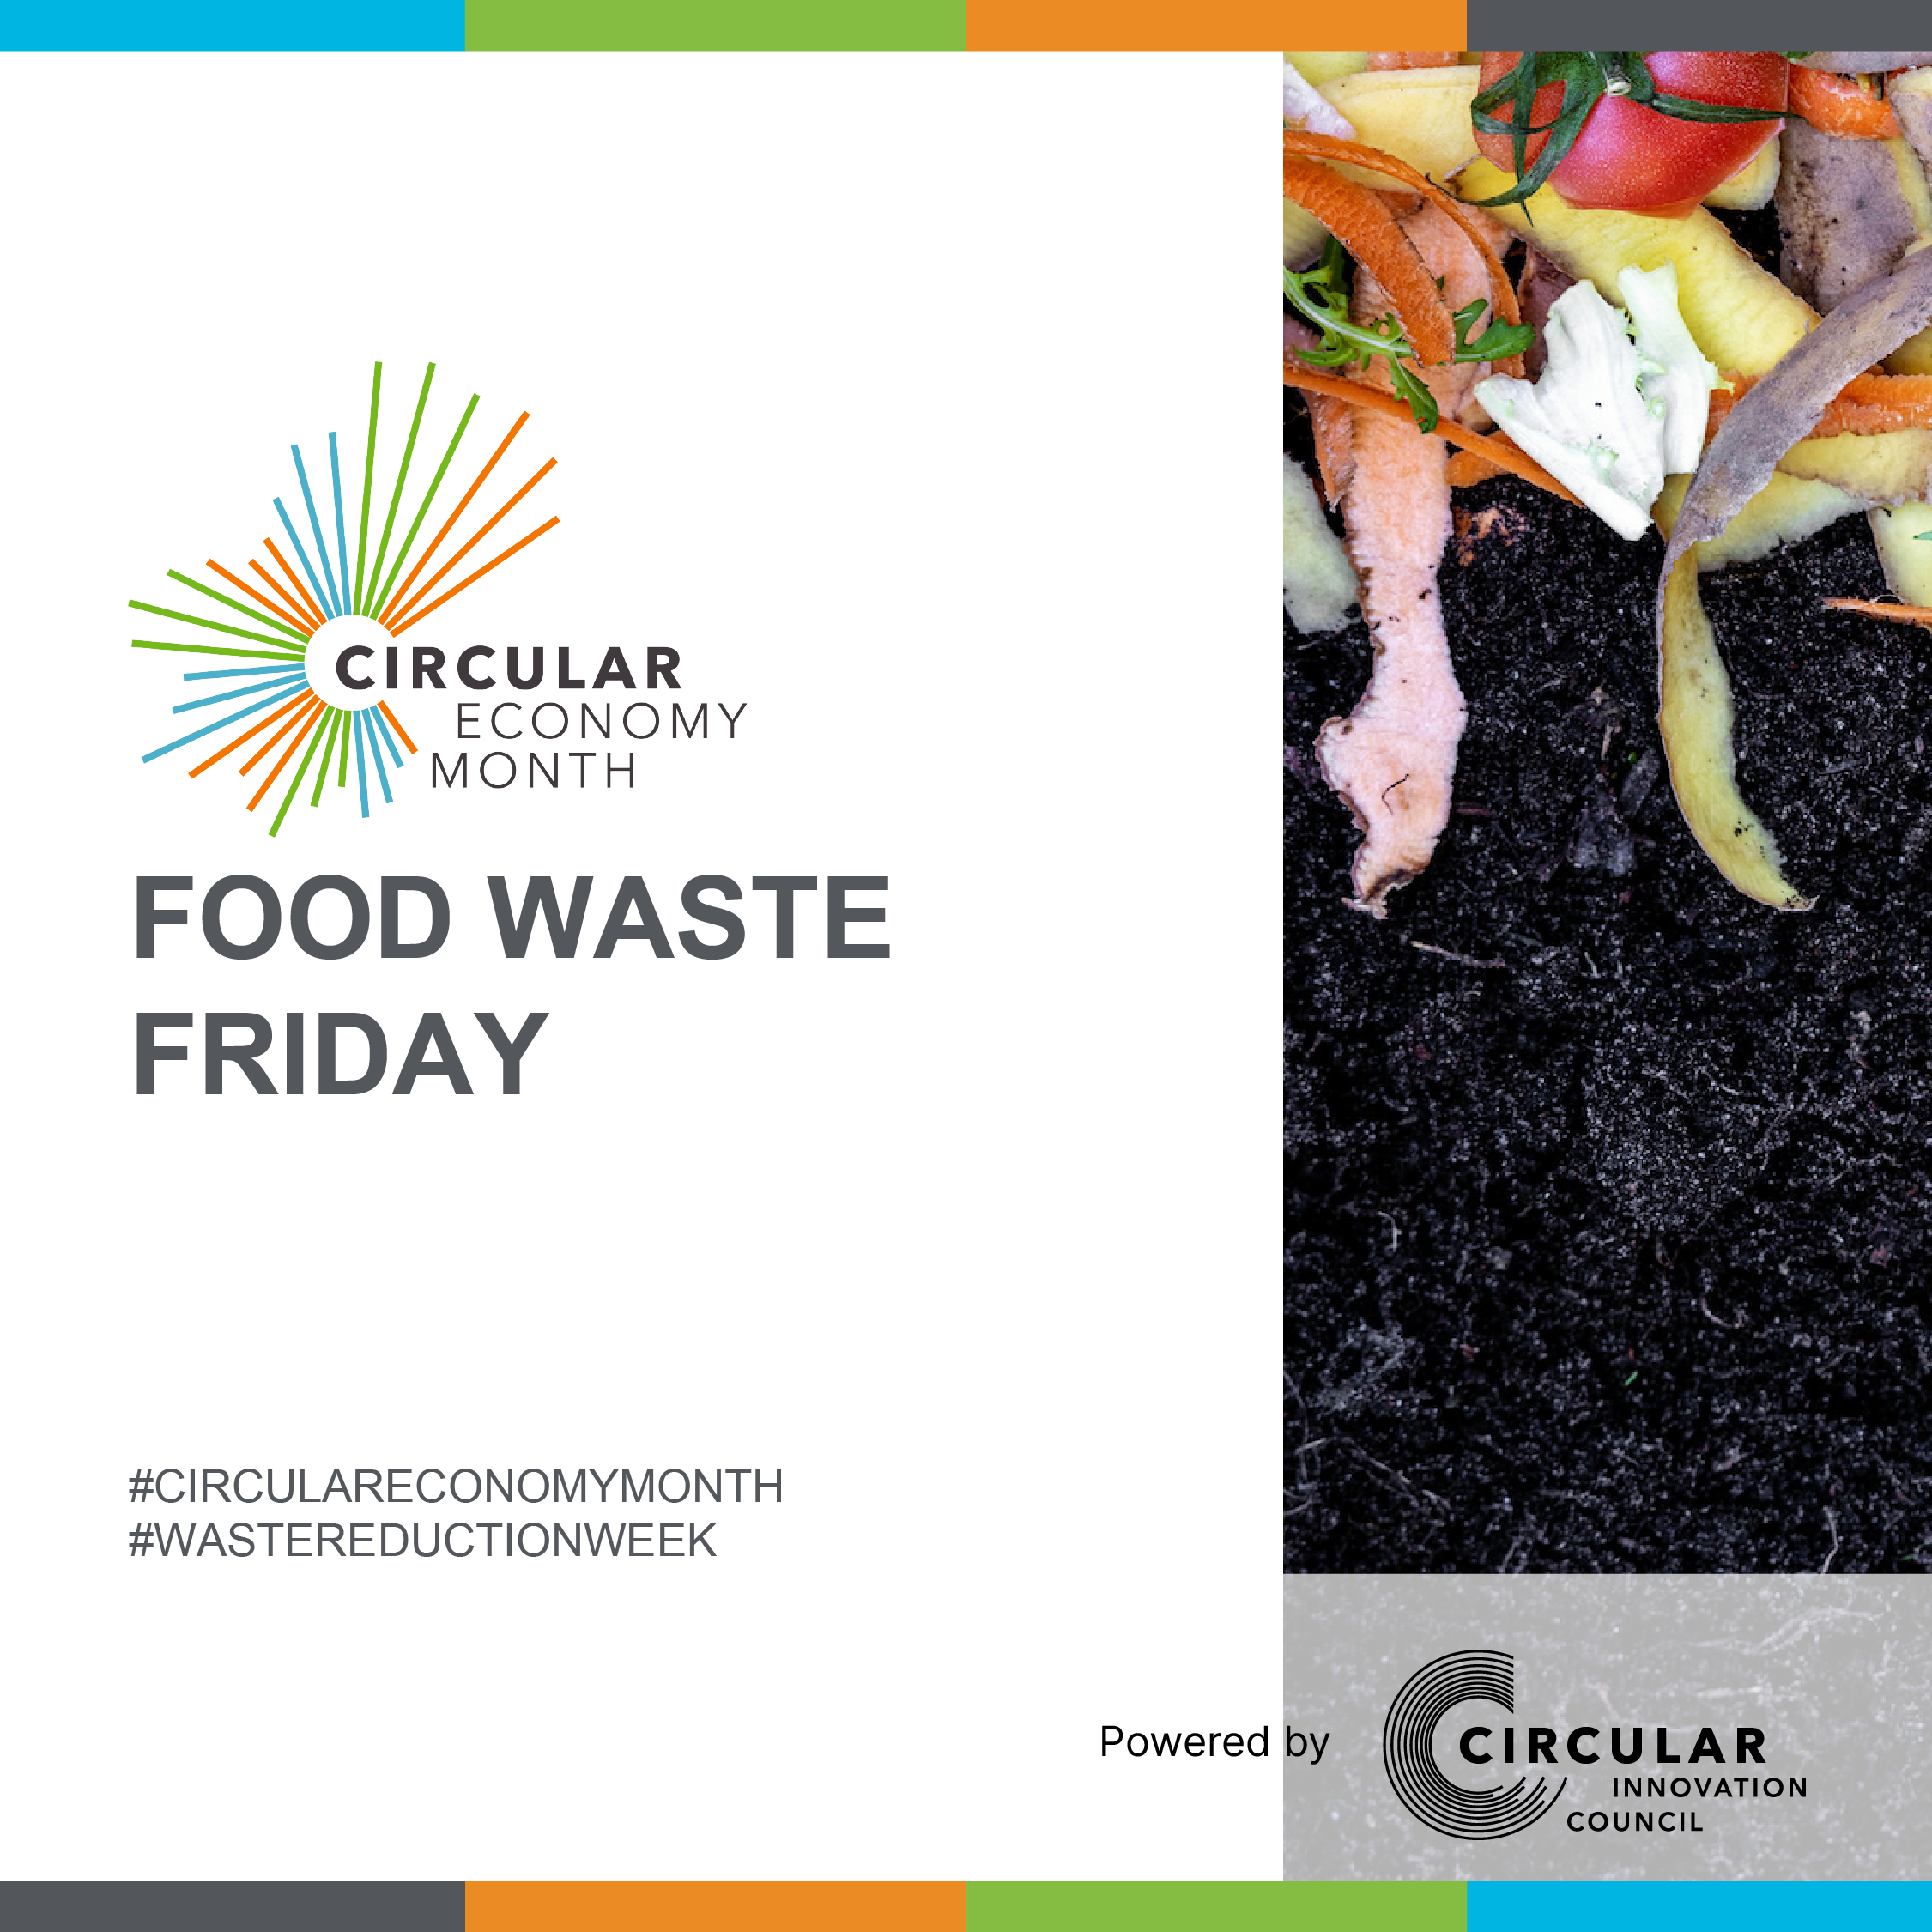 A pile of food waste scraps, including orange peels, green onion slices, potato peels, and egg shells, sit atop a pile of rich, brown-black compost. Food Waste Friday. Circular Economy Month, powered by Circular Innovation Council. #CircularEconomyMonth #WasteReductionWeek.